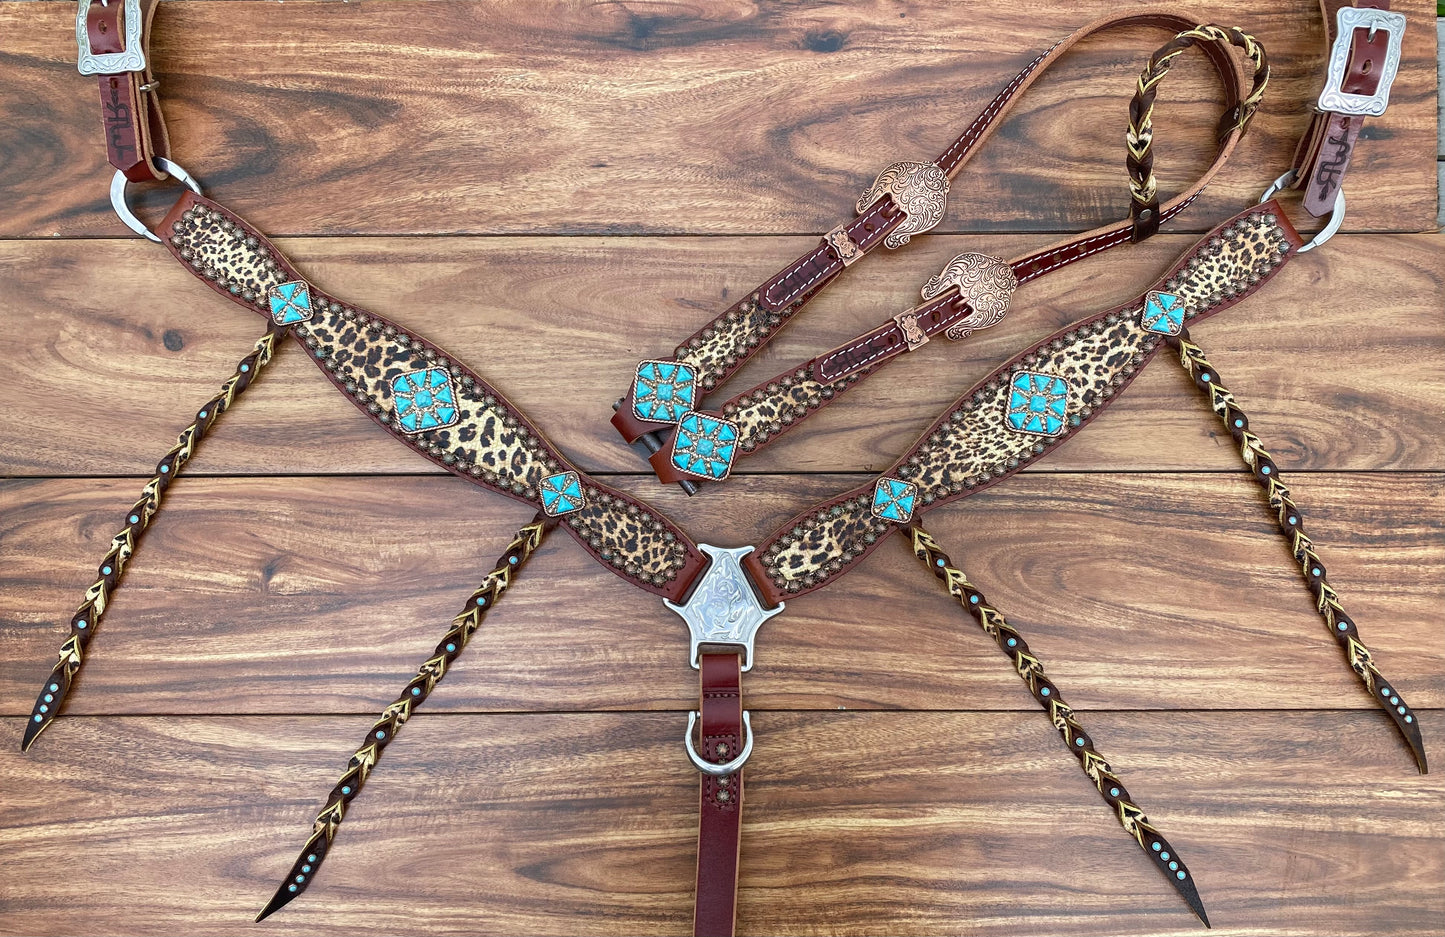 Cheetah with turquoise and tassels